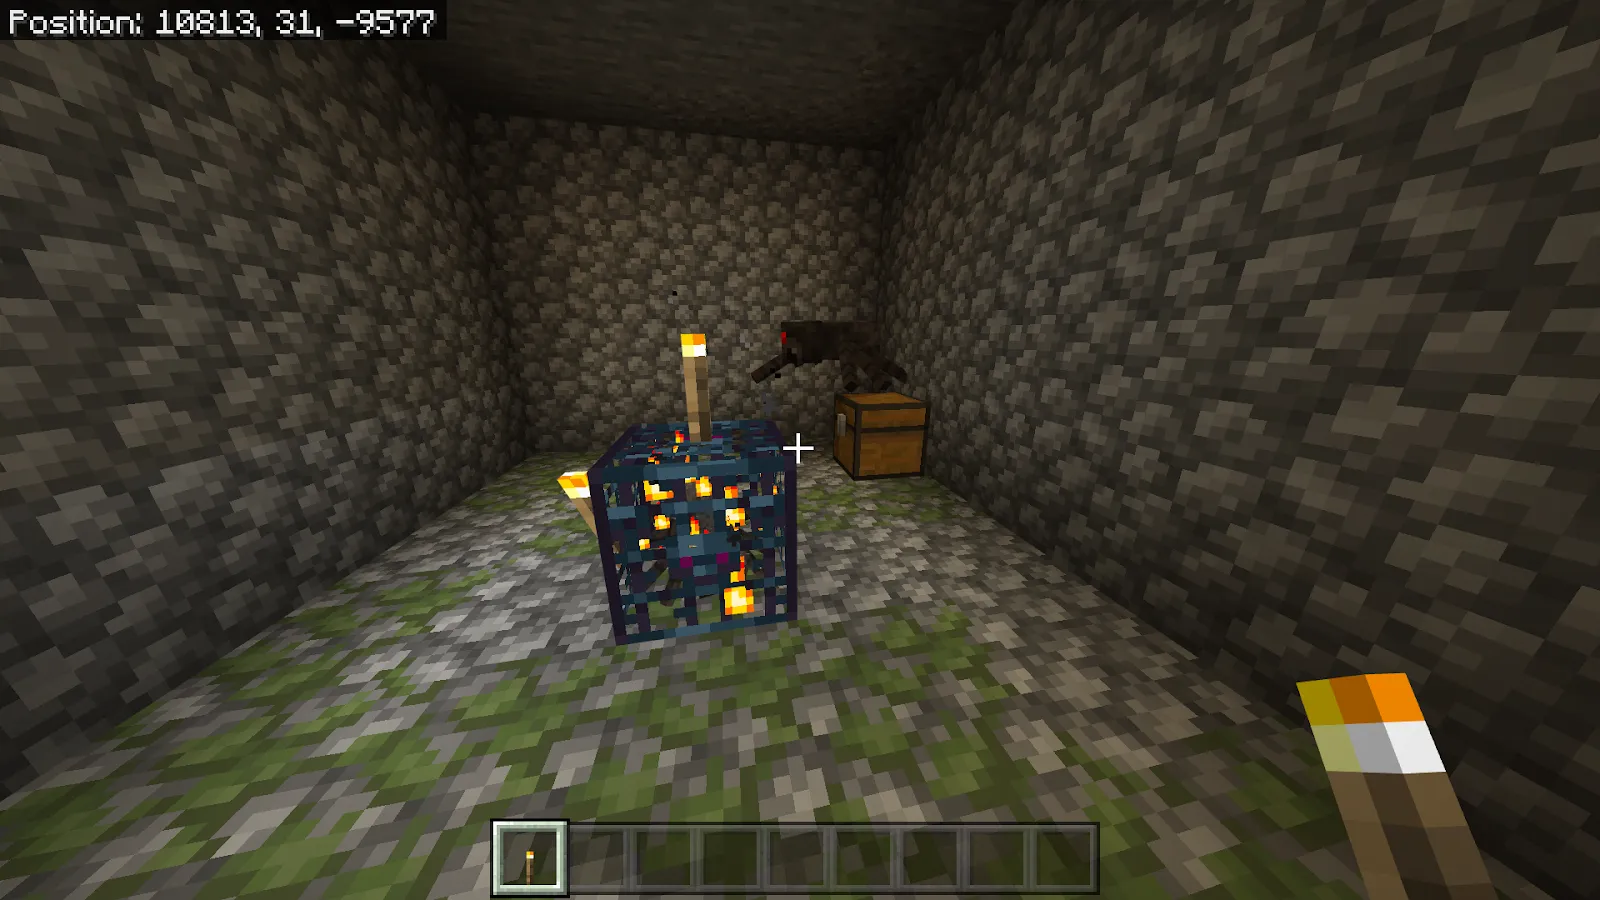 An image of a spider spawner and one spider in the background